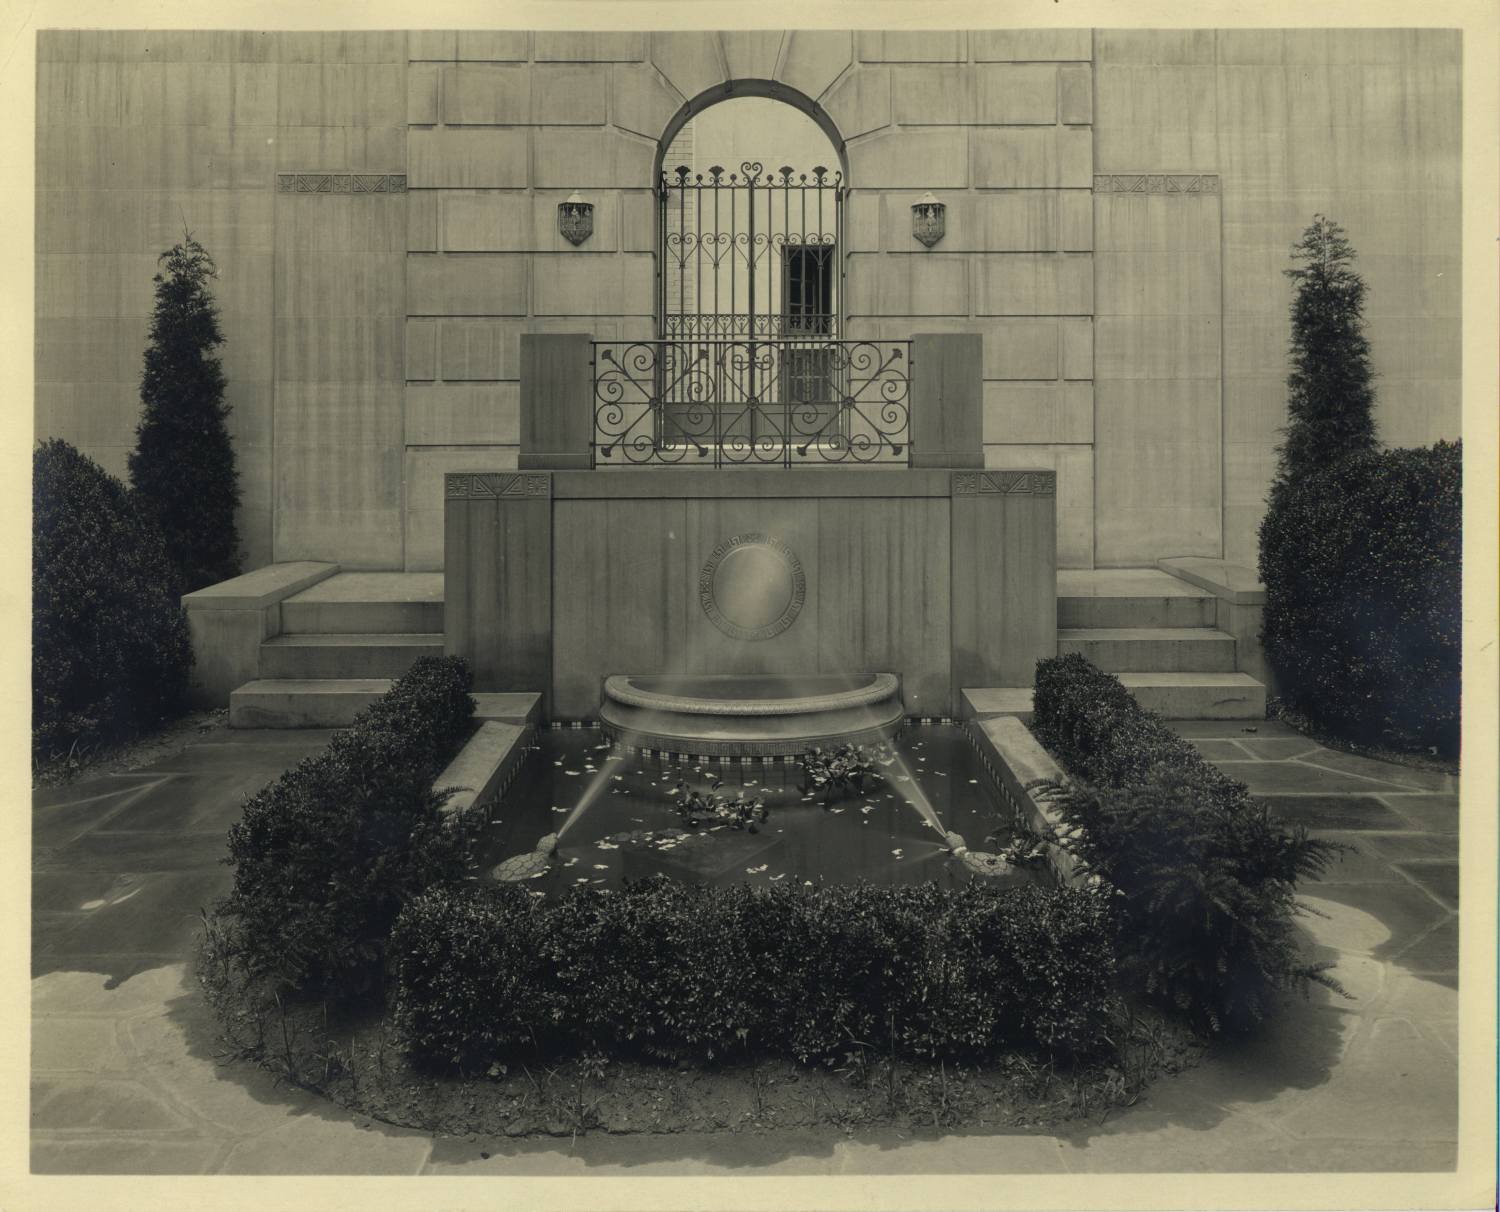 Fountain at the Institution's Jackson Place headquarters, on Lafayette Square in D.C.